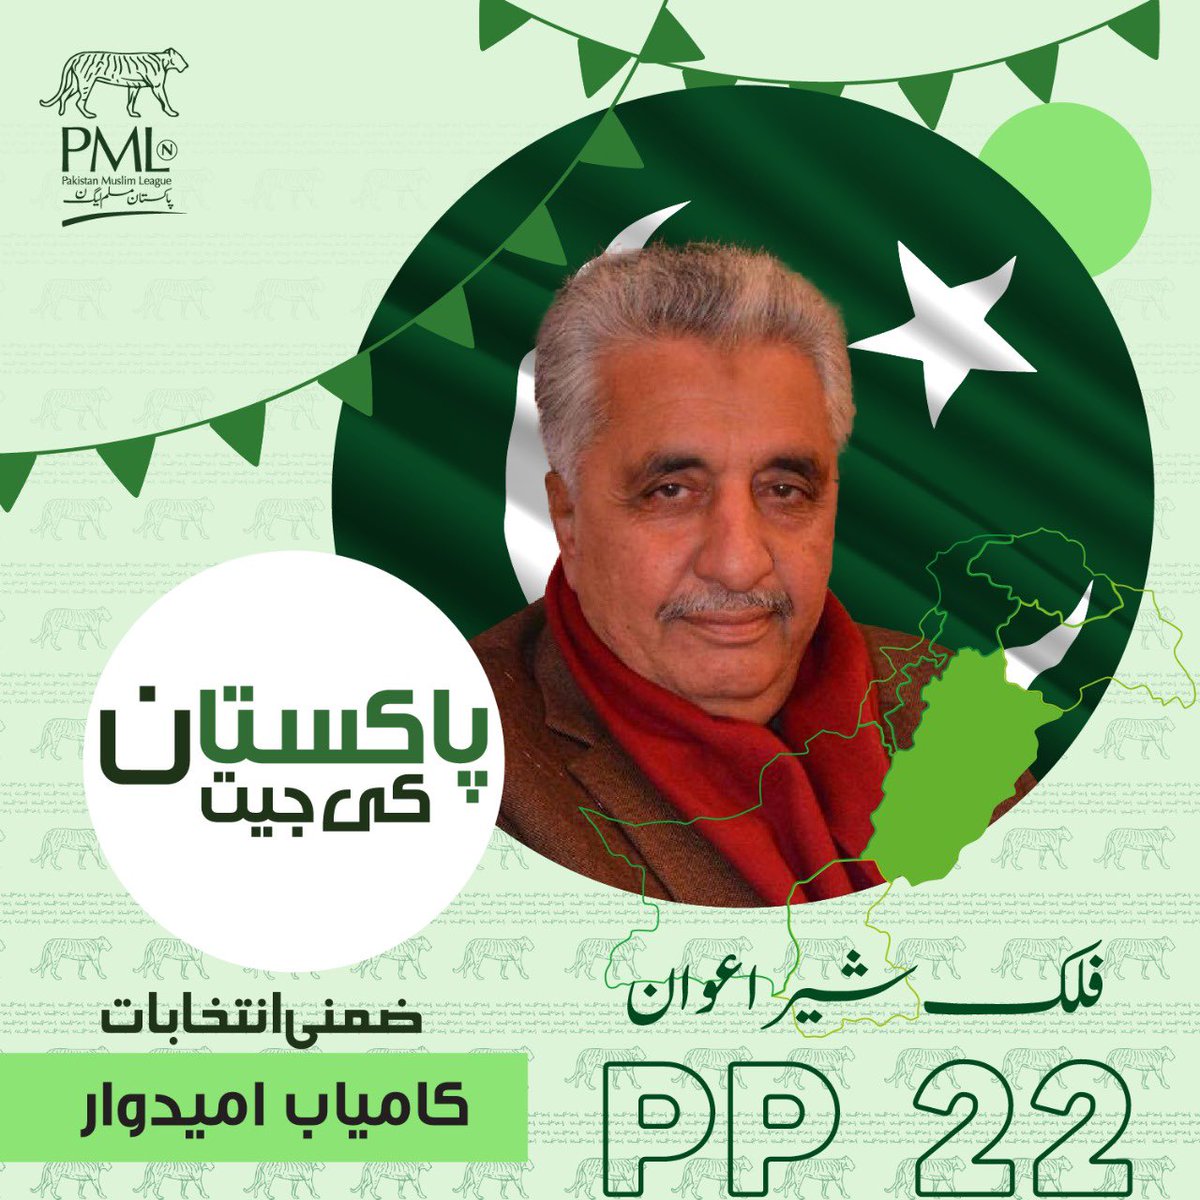 PP-22 Sher ka! PML-N candidate Falak Sher Awan wins. Public has rejected the politics of anarchy.